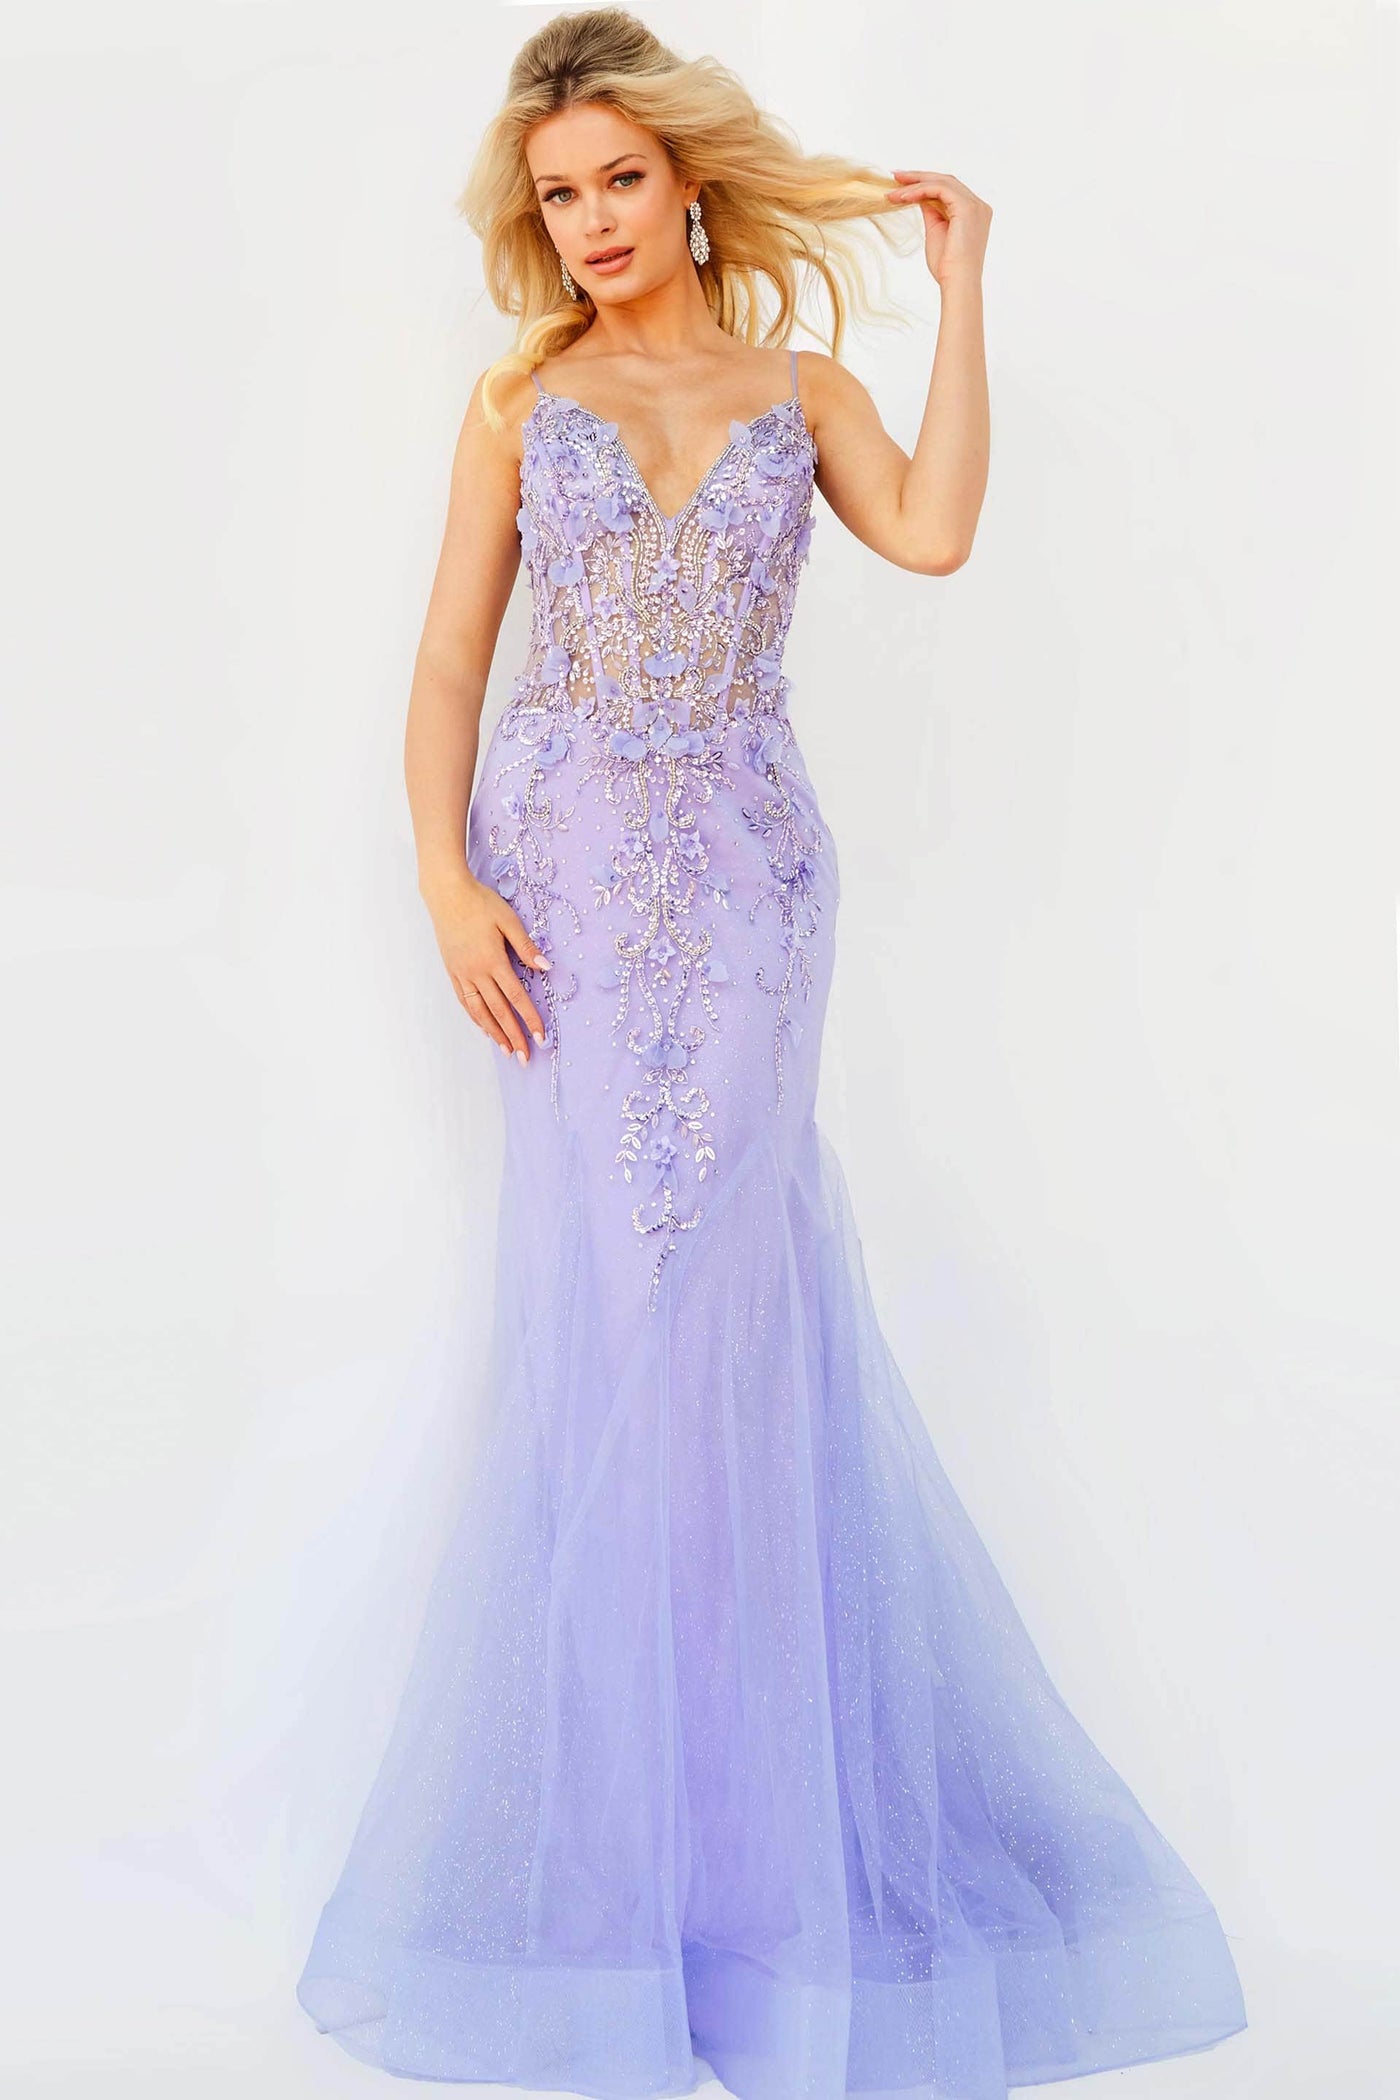 Jovani - 05839 Beaded Floral Applique Corset Bodice Mermaid Gown Prom Dresses 00 / Periwinkle